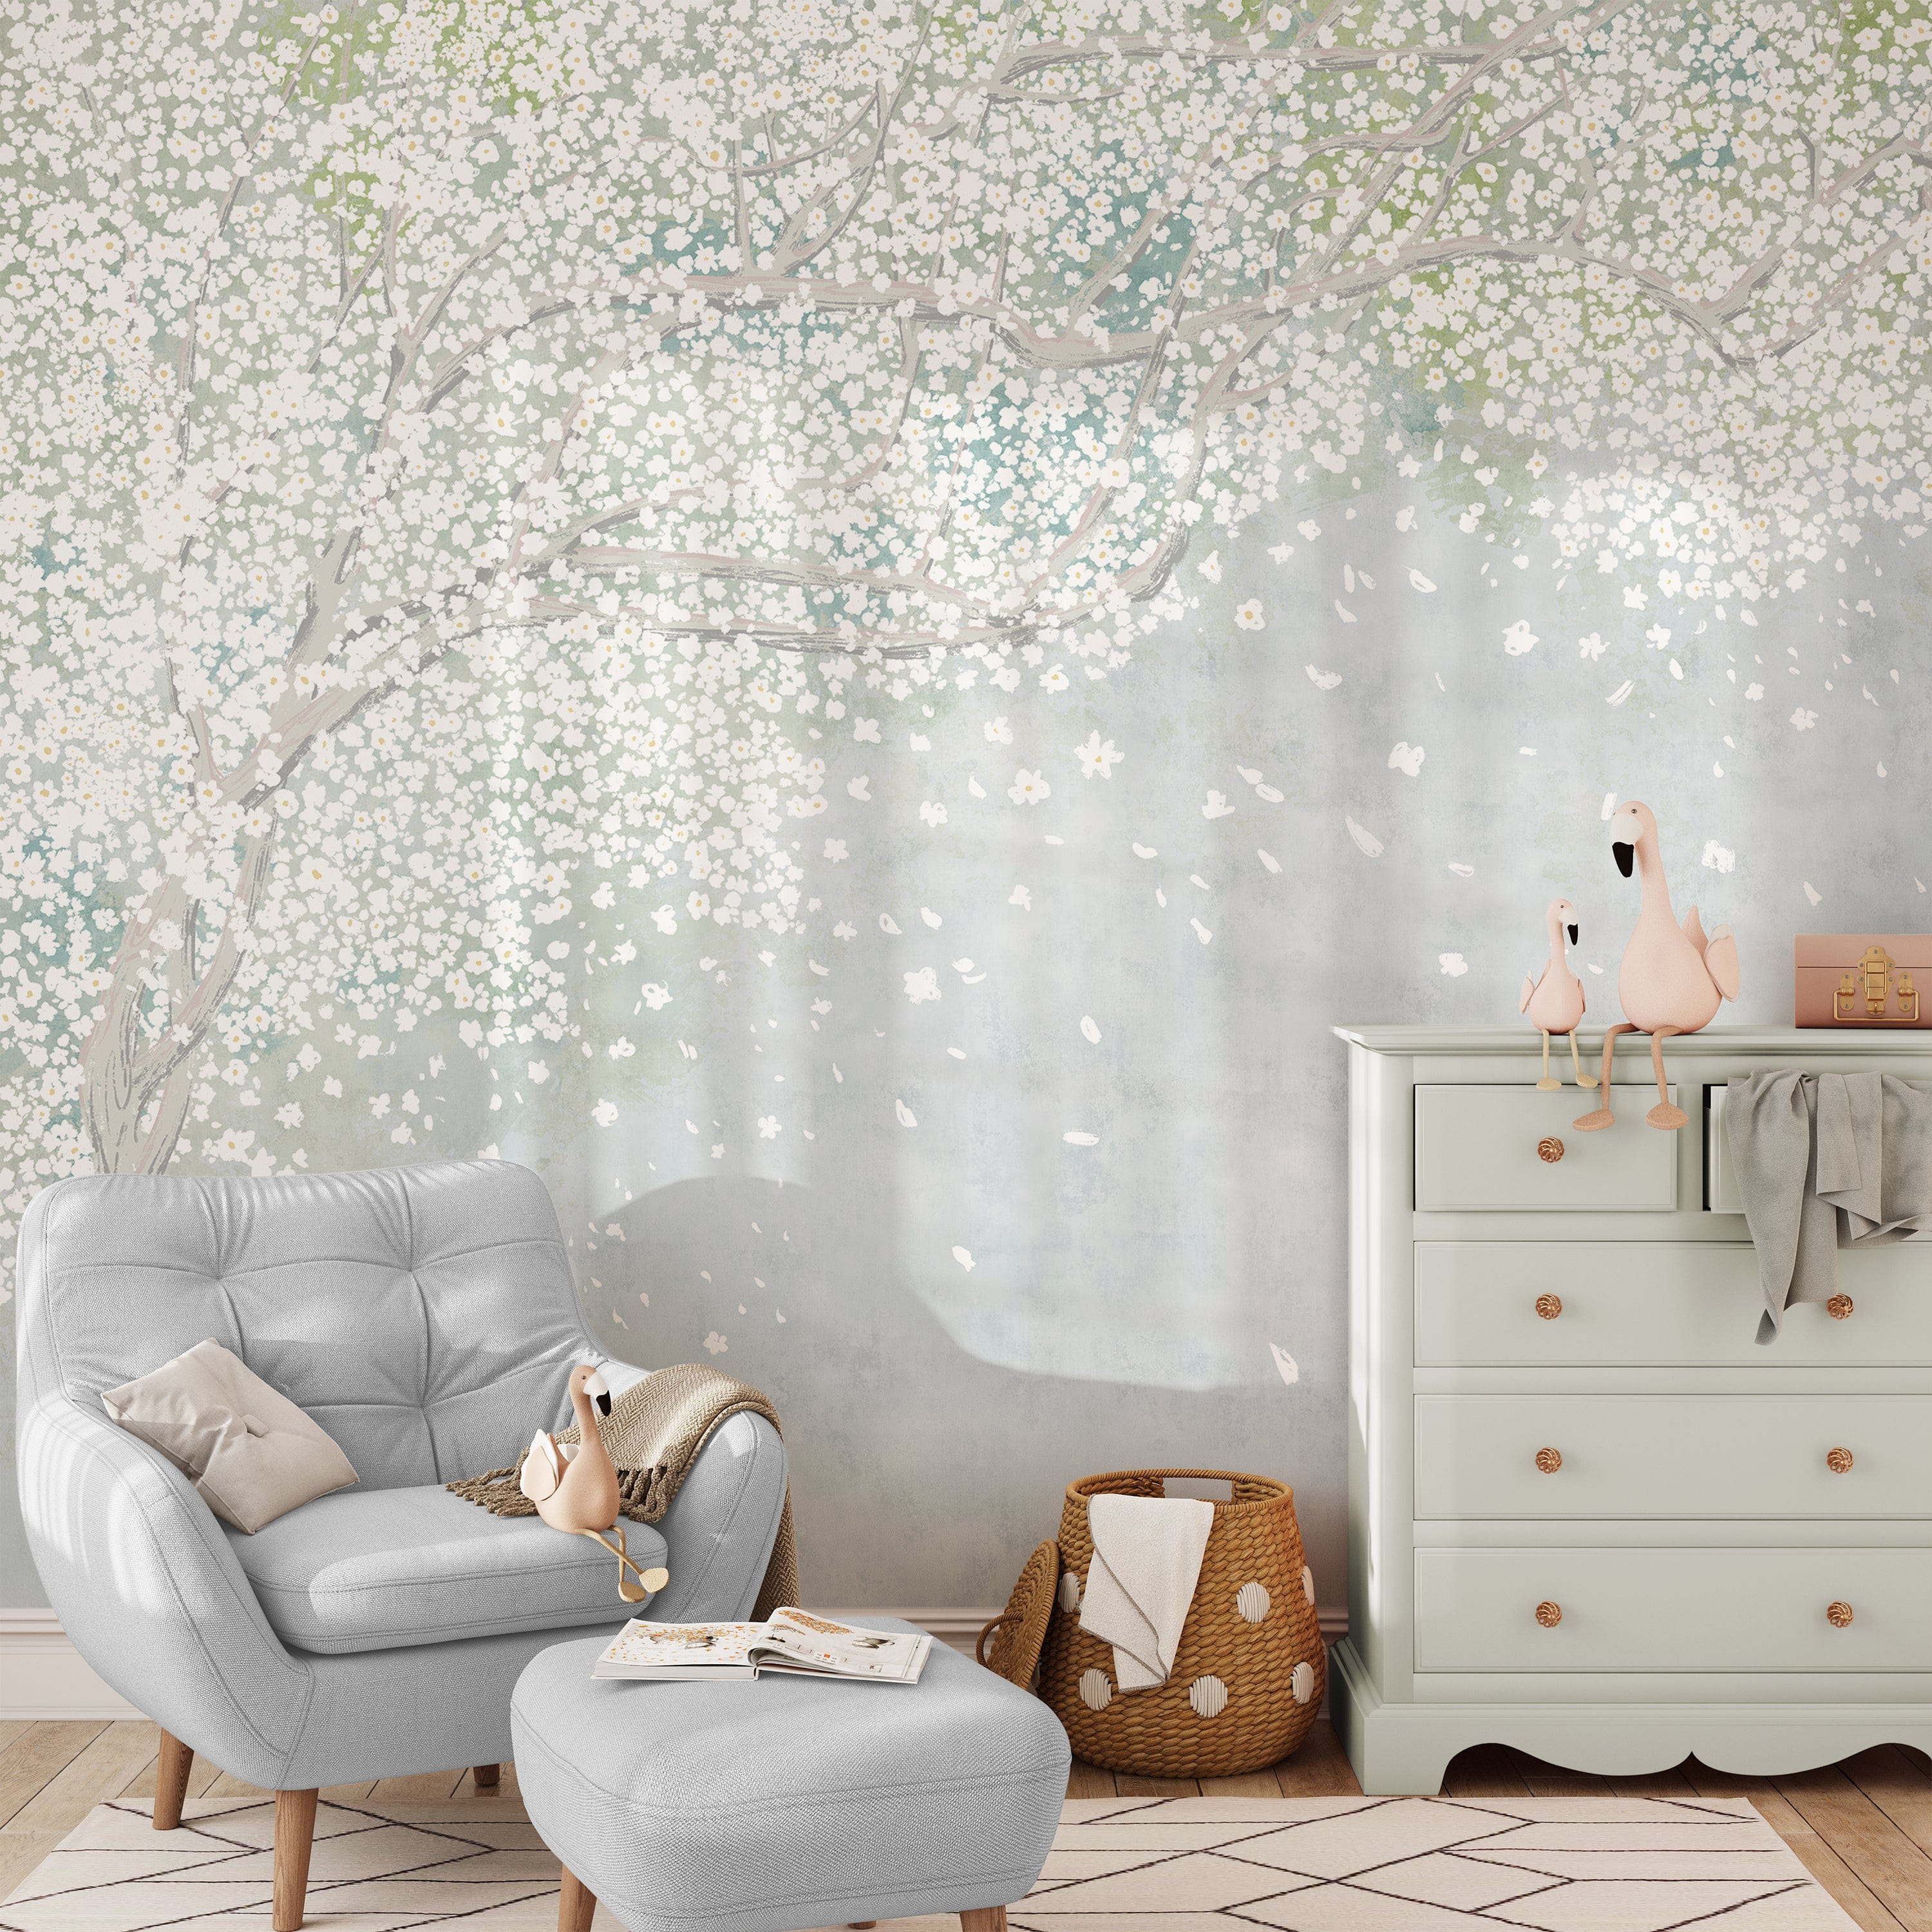 A comfortable reading nook graced by the Cherry Blossom Canopy wallpaper, its dreamy branches and flowers creating a tranquil backdrop. A plush grey armchair and matching footstool invite relaxation, with charming flamingo figurines on a white dresser completing the serene scene.